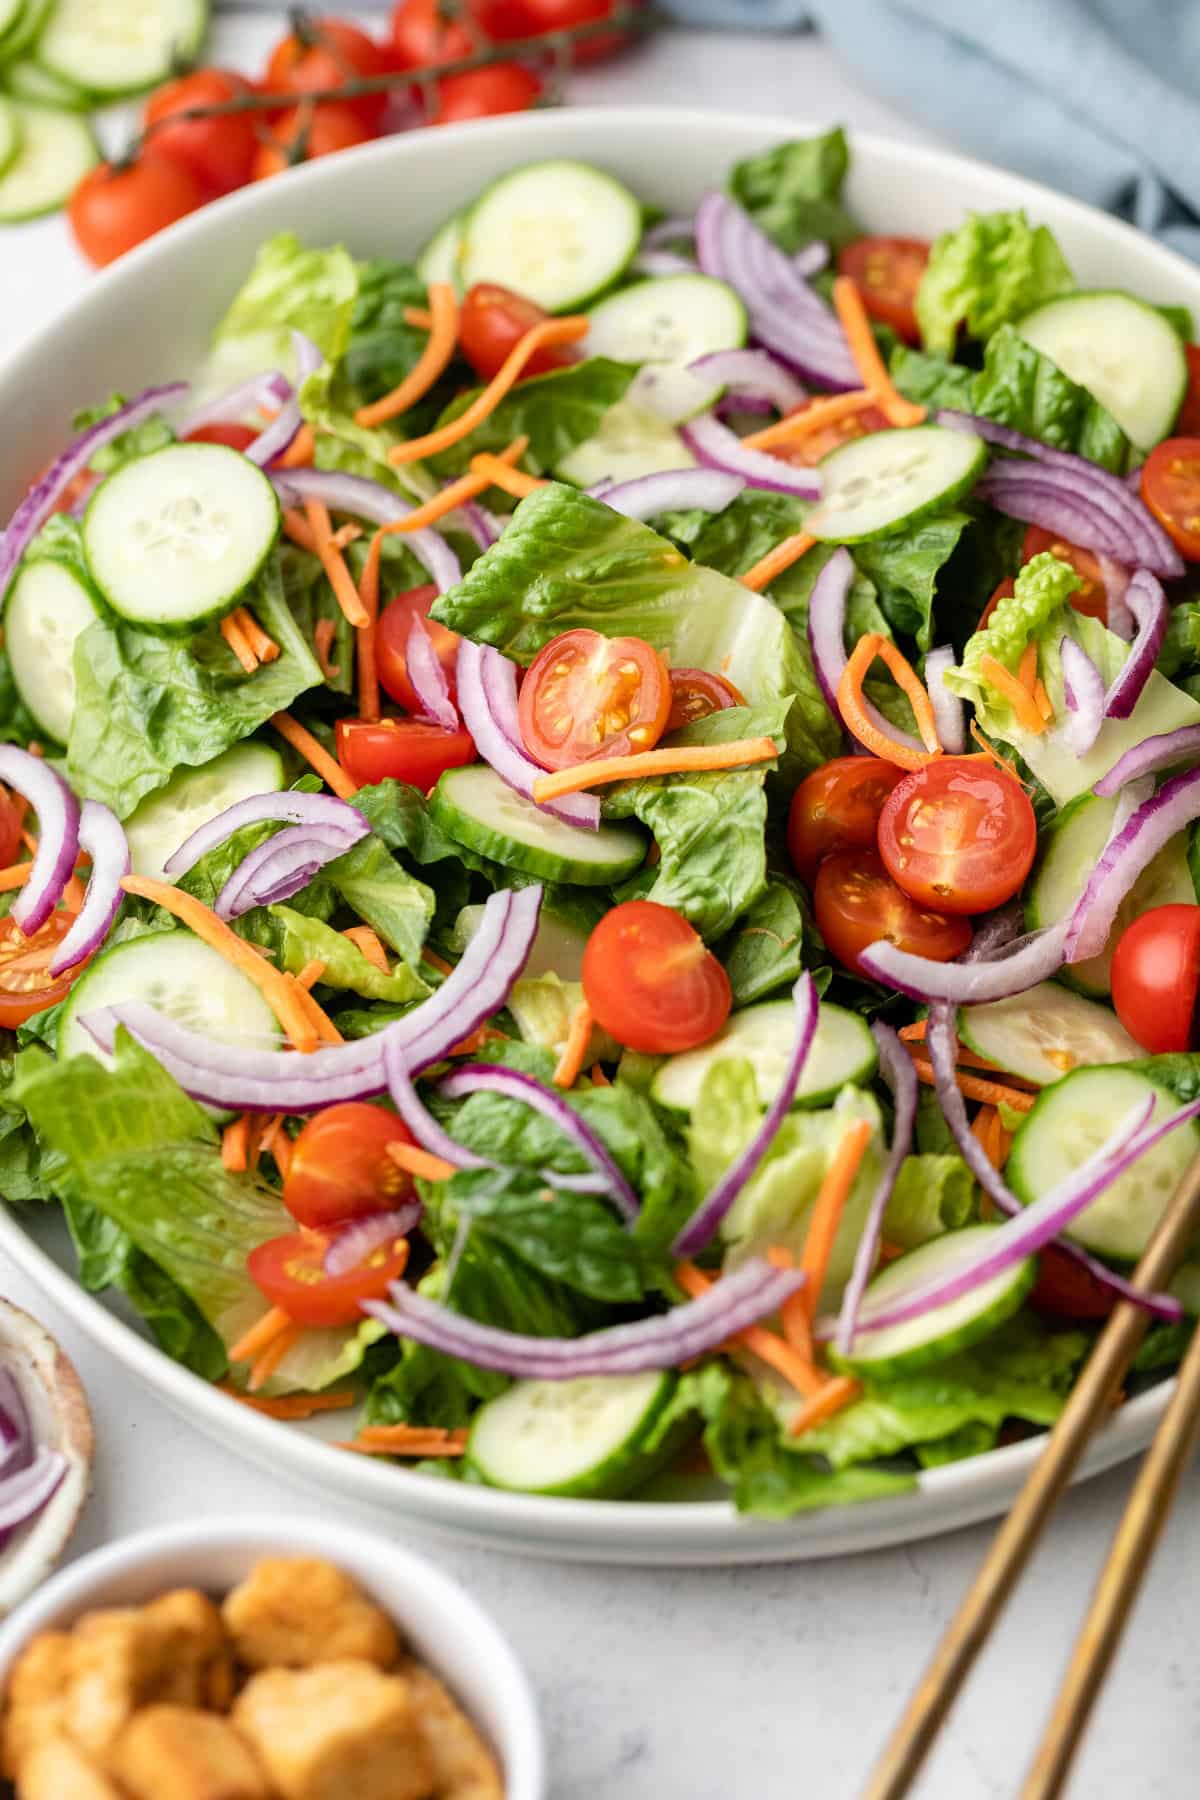 Close up of tomatoes, red onion, green lettuce, cucumbers, and carrots in a large salad bowl.